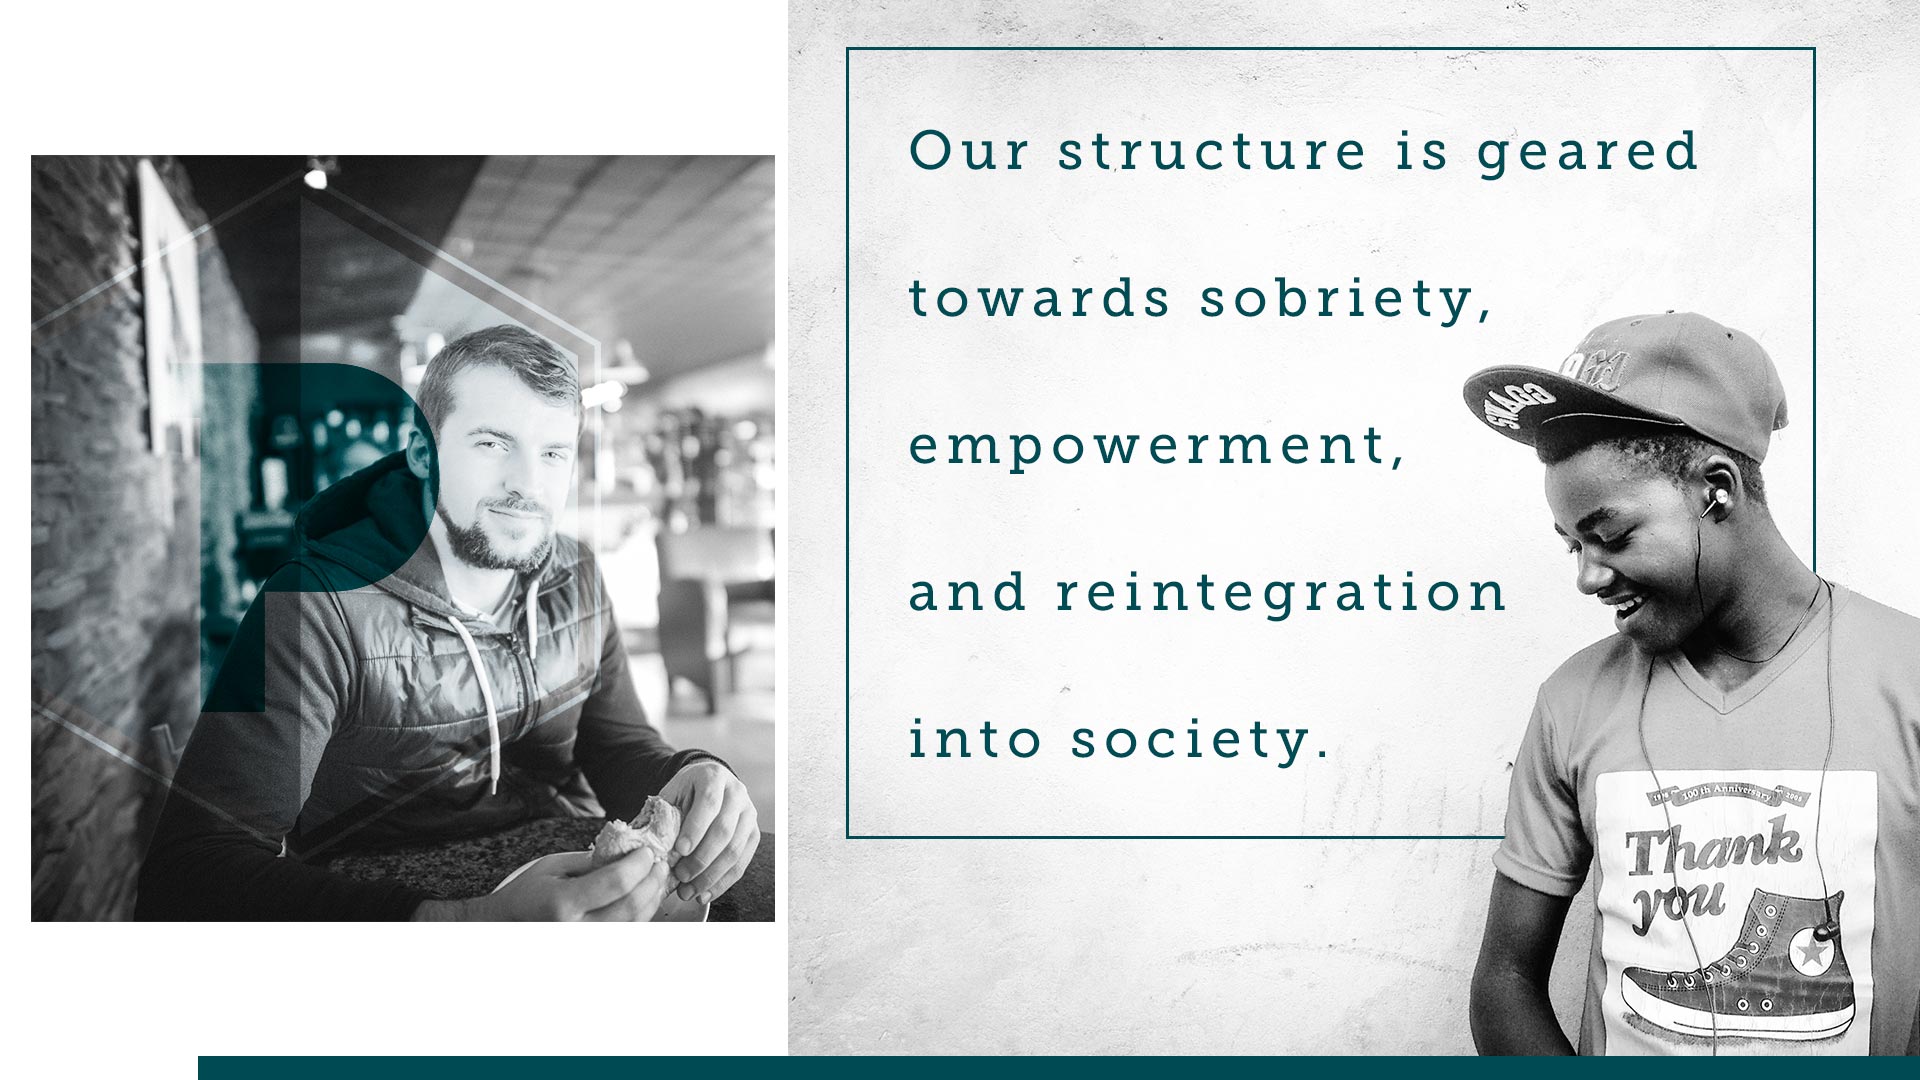 Prosperity Recovery Residence has structure which is geared towards sobriety, empowerment, and reintegration into society.